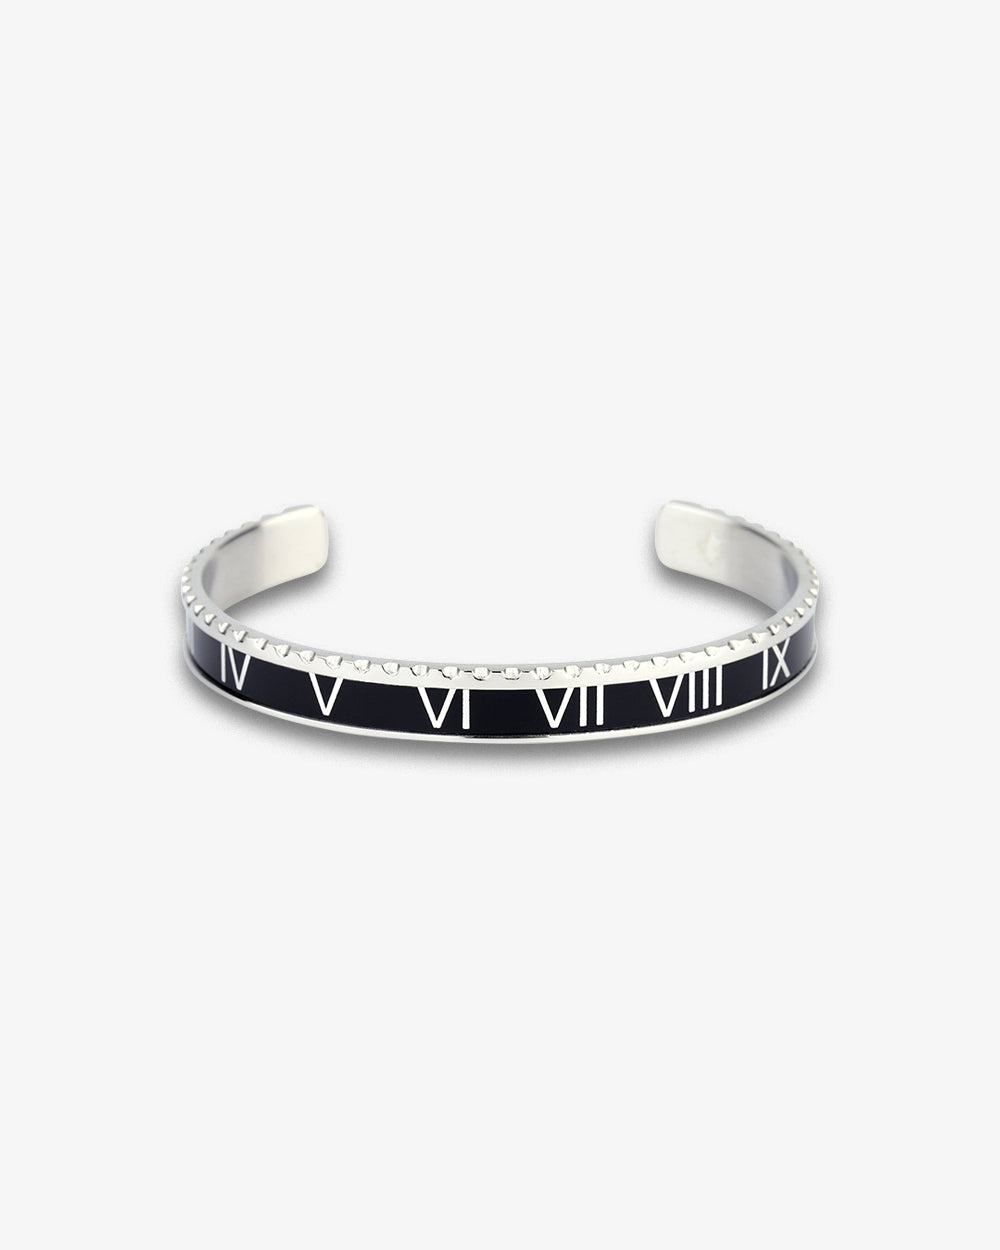 Swiss Concept Classic Roman Numeral Speed Bracelet (Black & Stainless Steel) - Stainless Steel